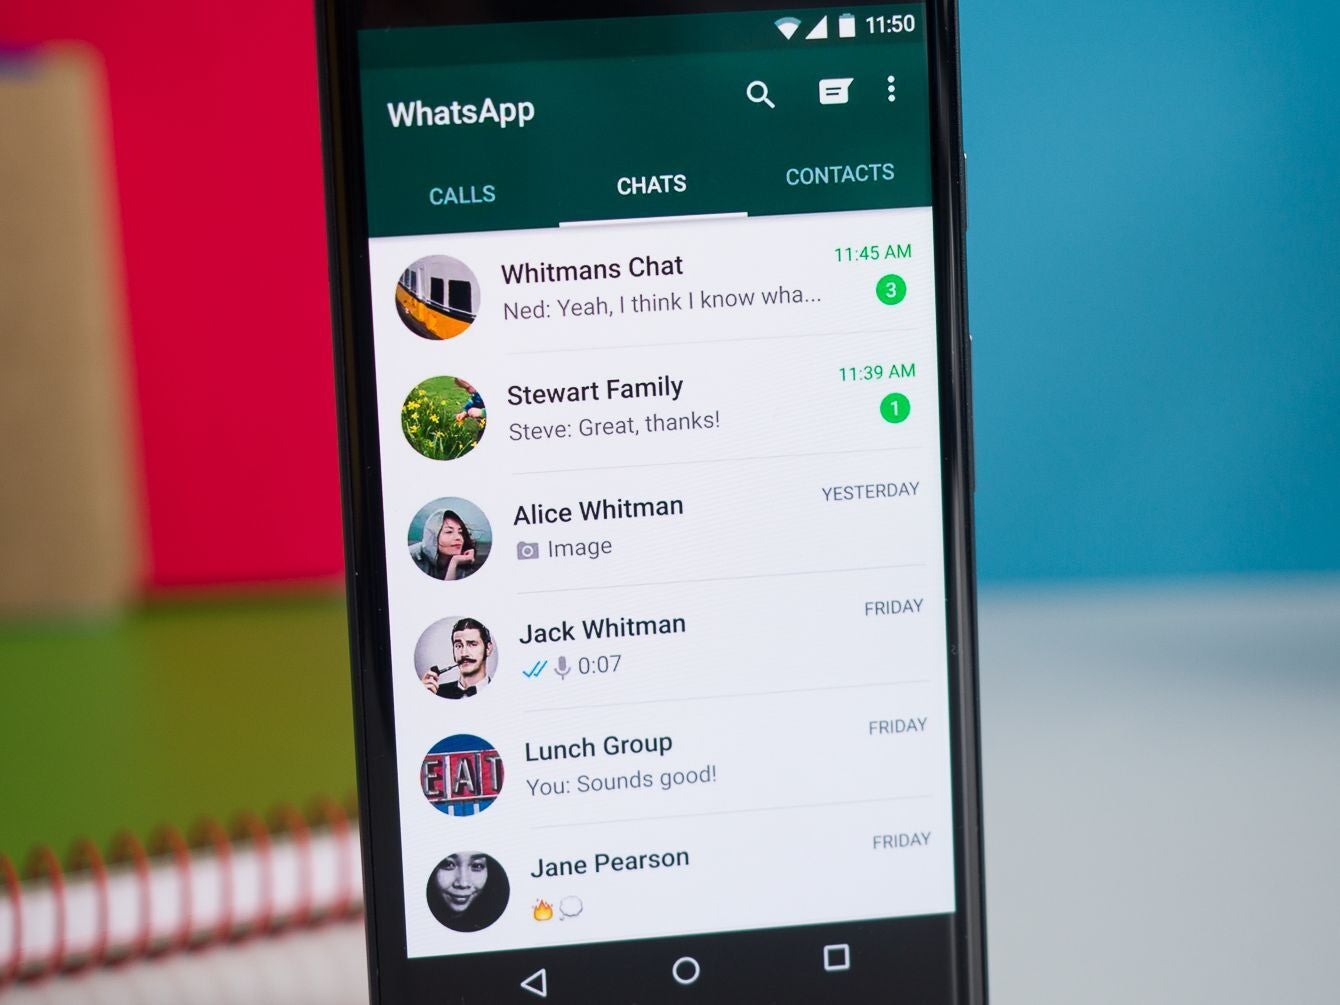 Companion Mode - your WhatsApp account now available on your tablet or another phone! - WhatsApp Beta enables users to utilize the app on multiple phones